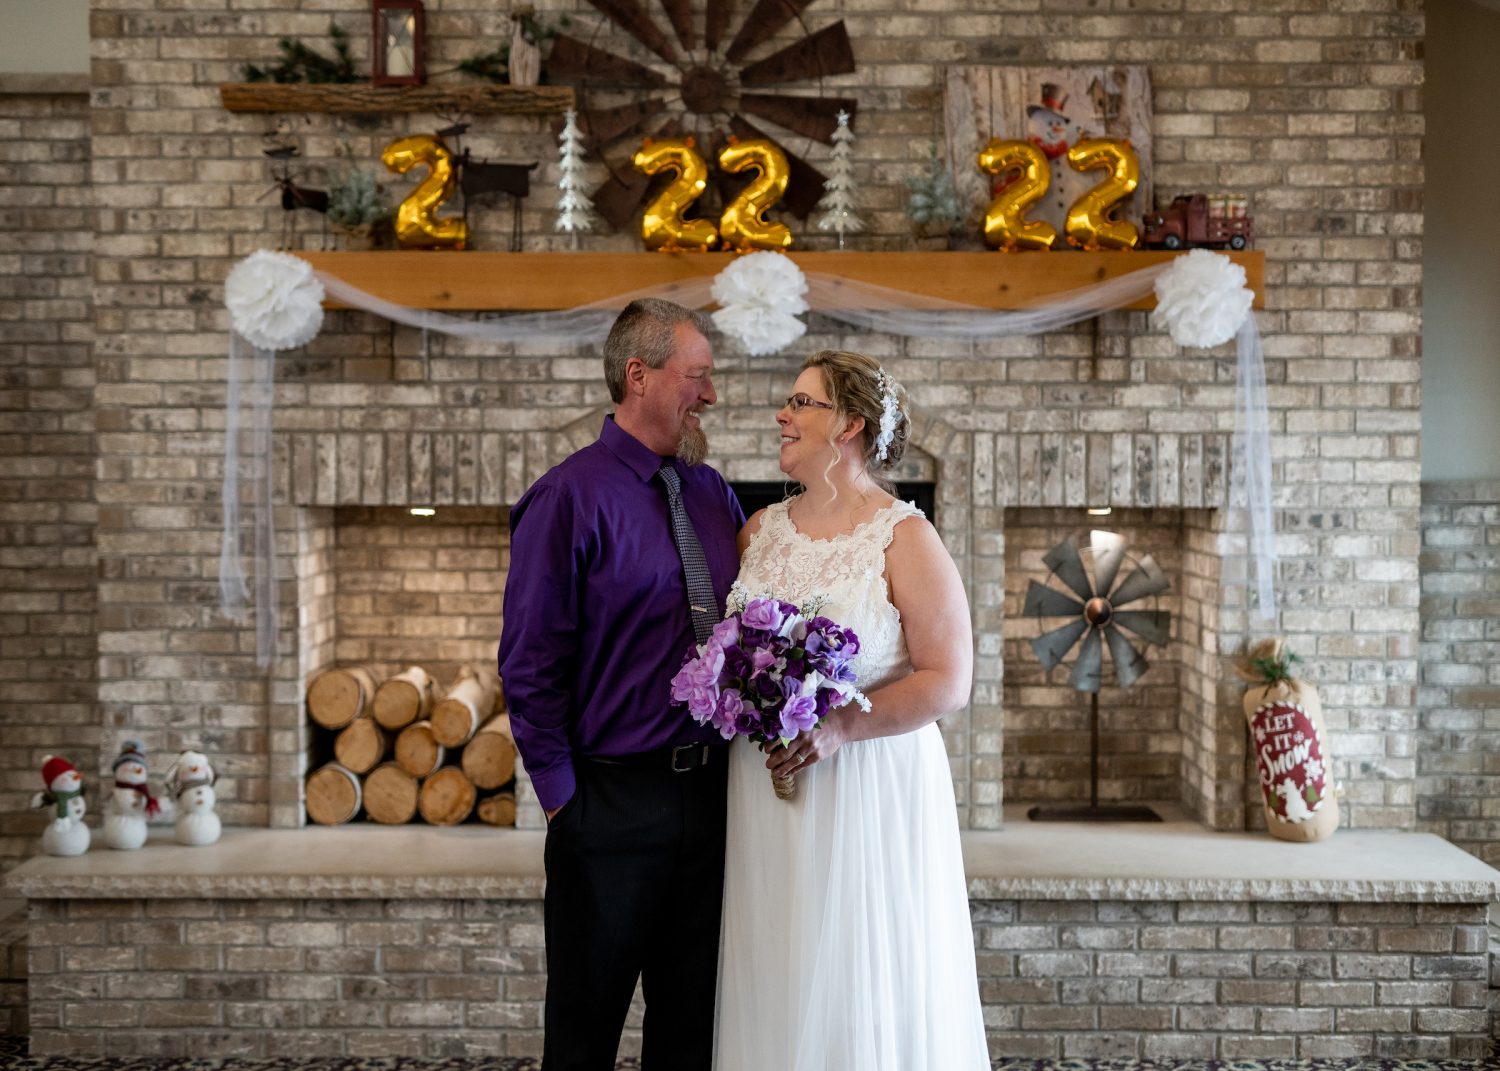 Local couple married at the AmericInn on 2-22-2022 at 2:22 p.m.